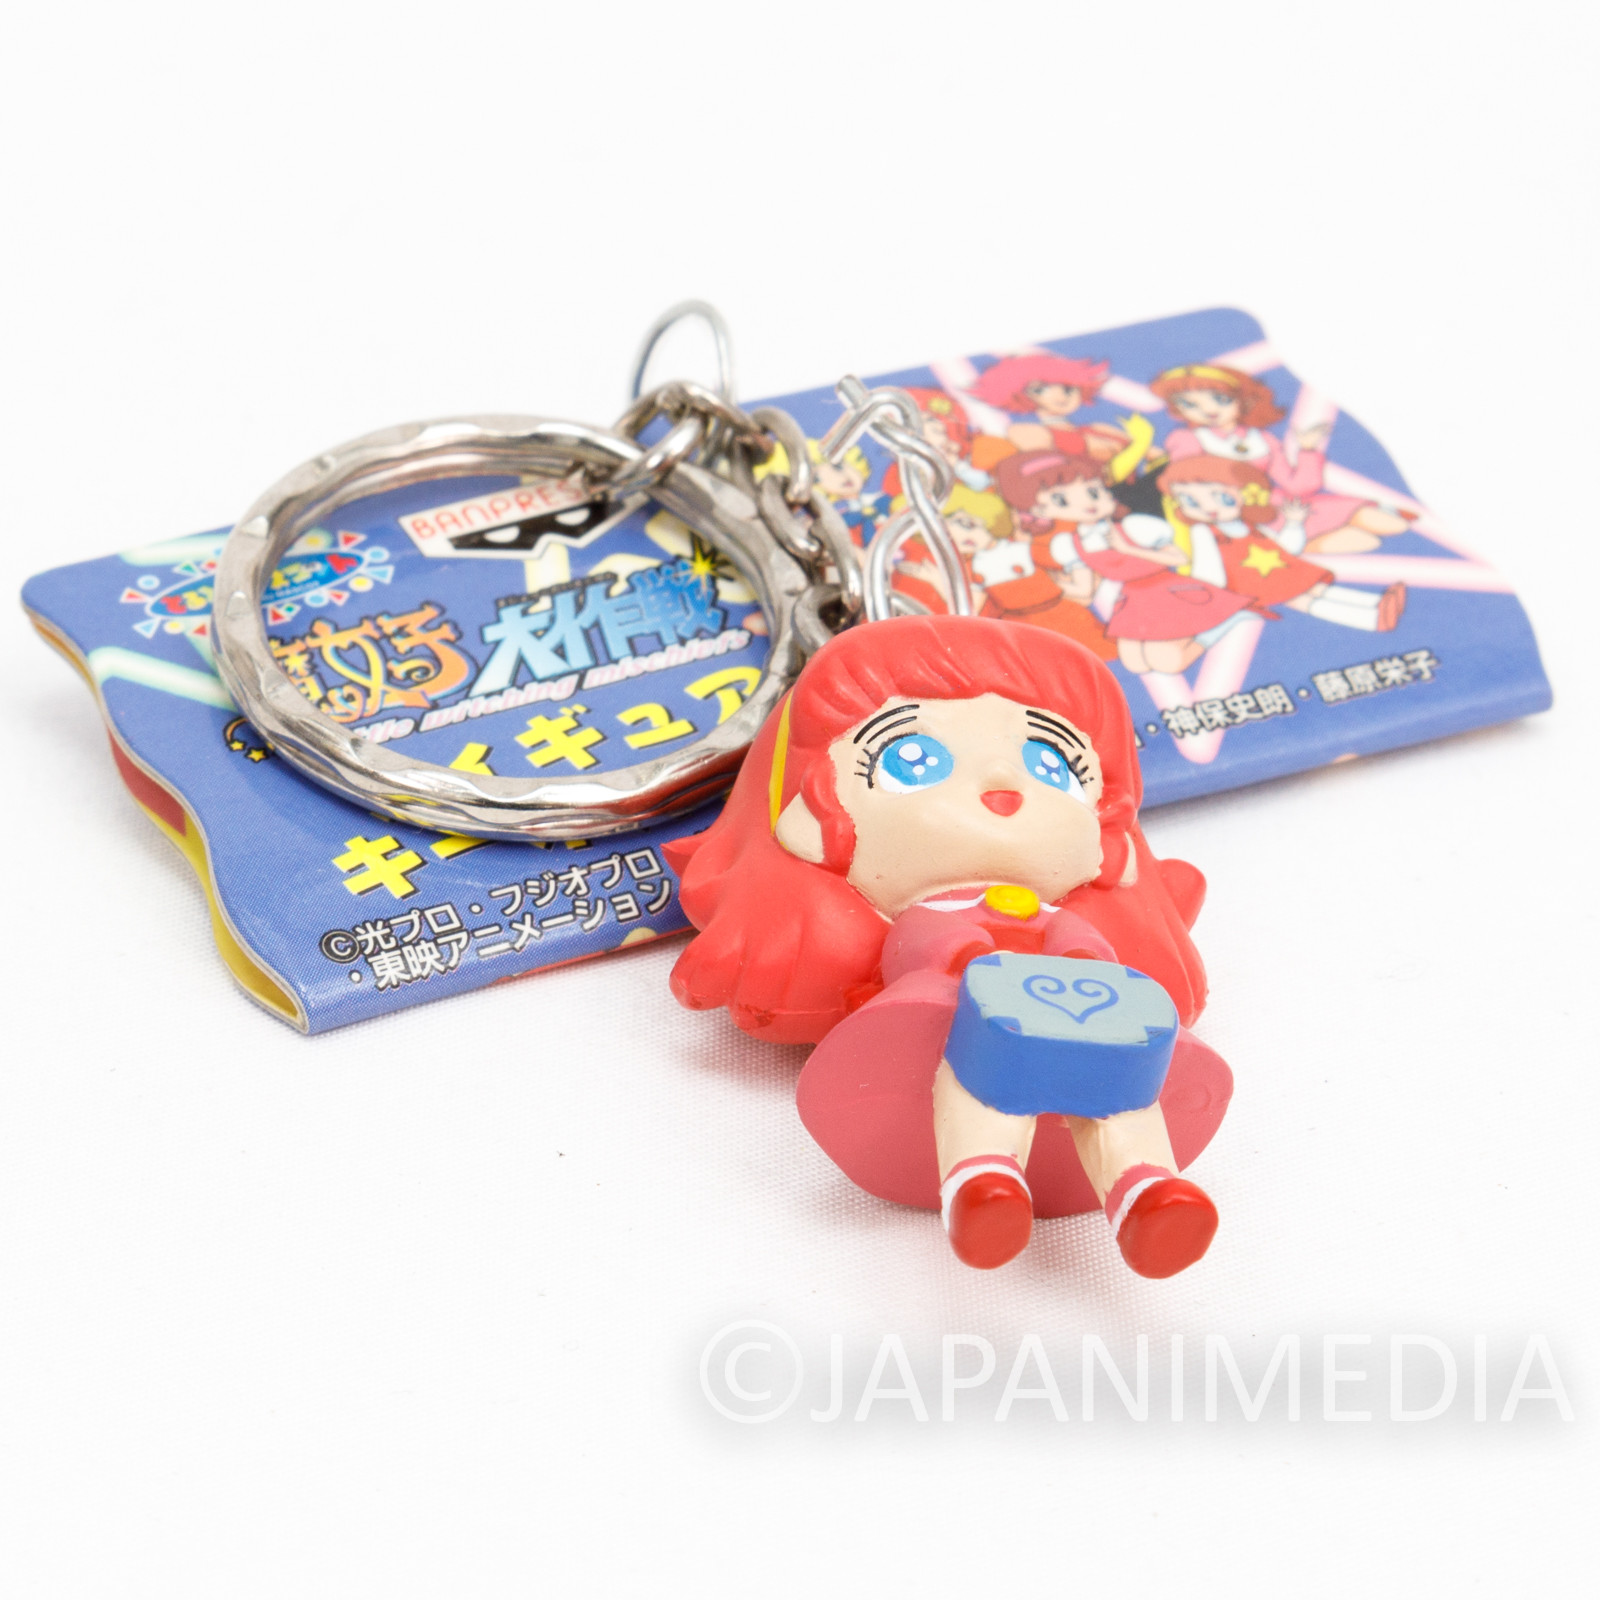 Lalabel The Magical Girl Mascot Figure Key Chain - Little witching mischiefs - ANIME